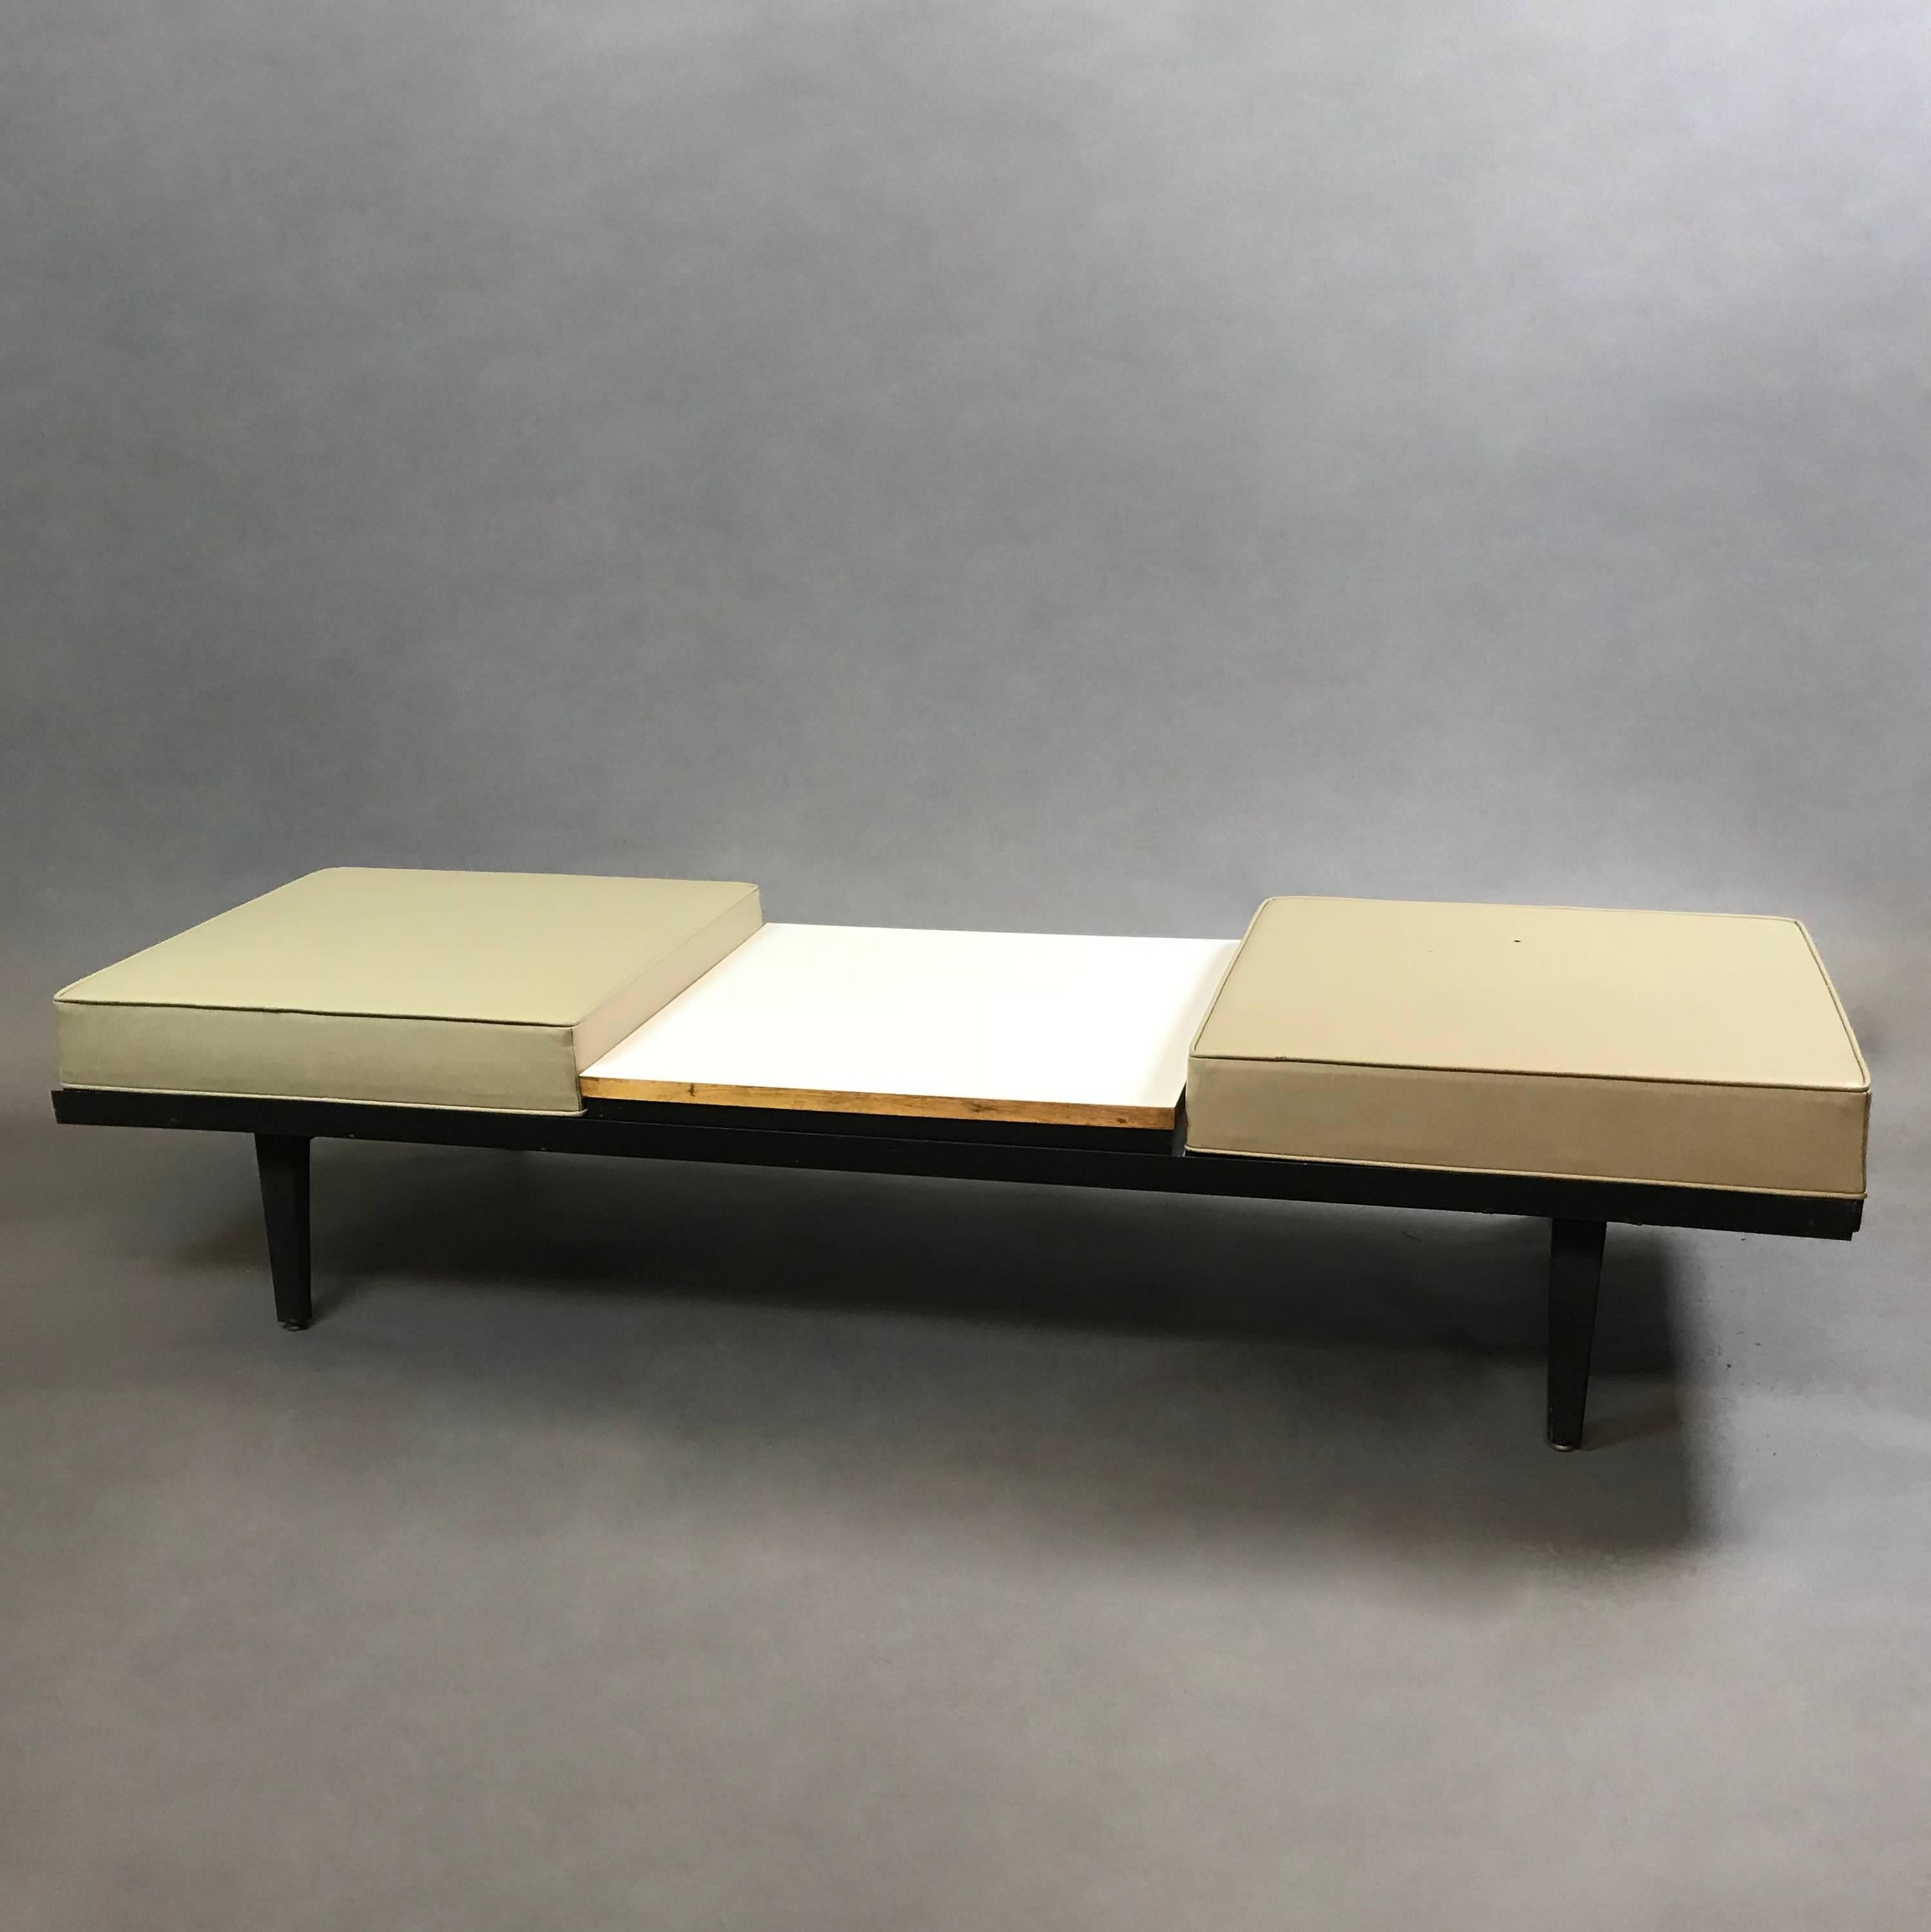 Early, modular bench by George Nelson, 